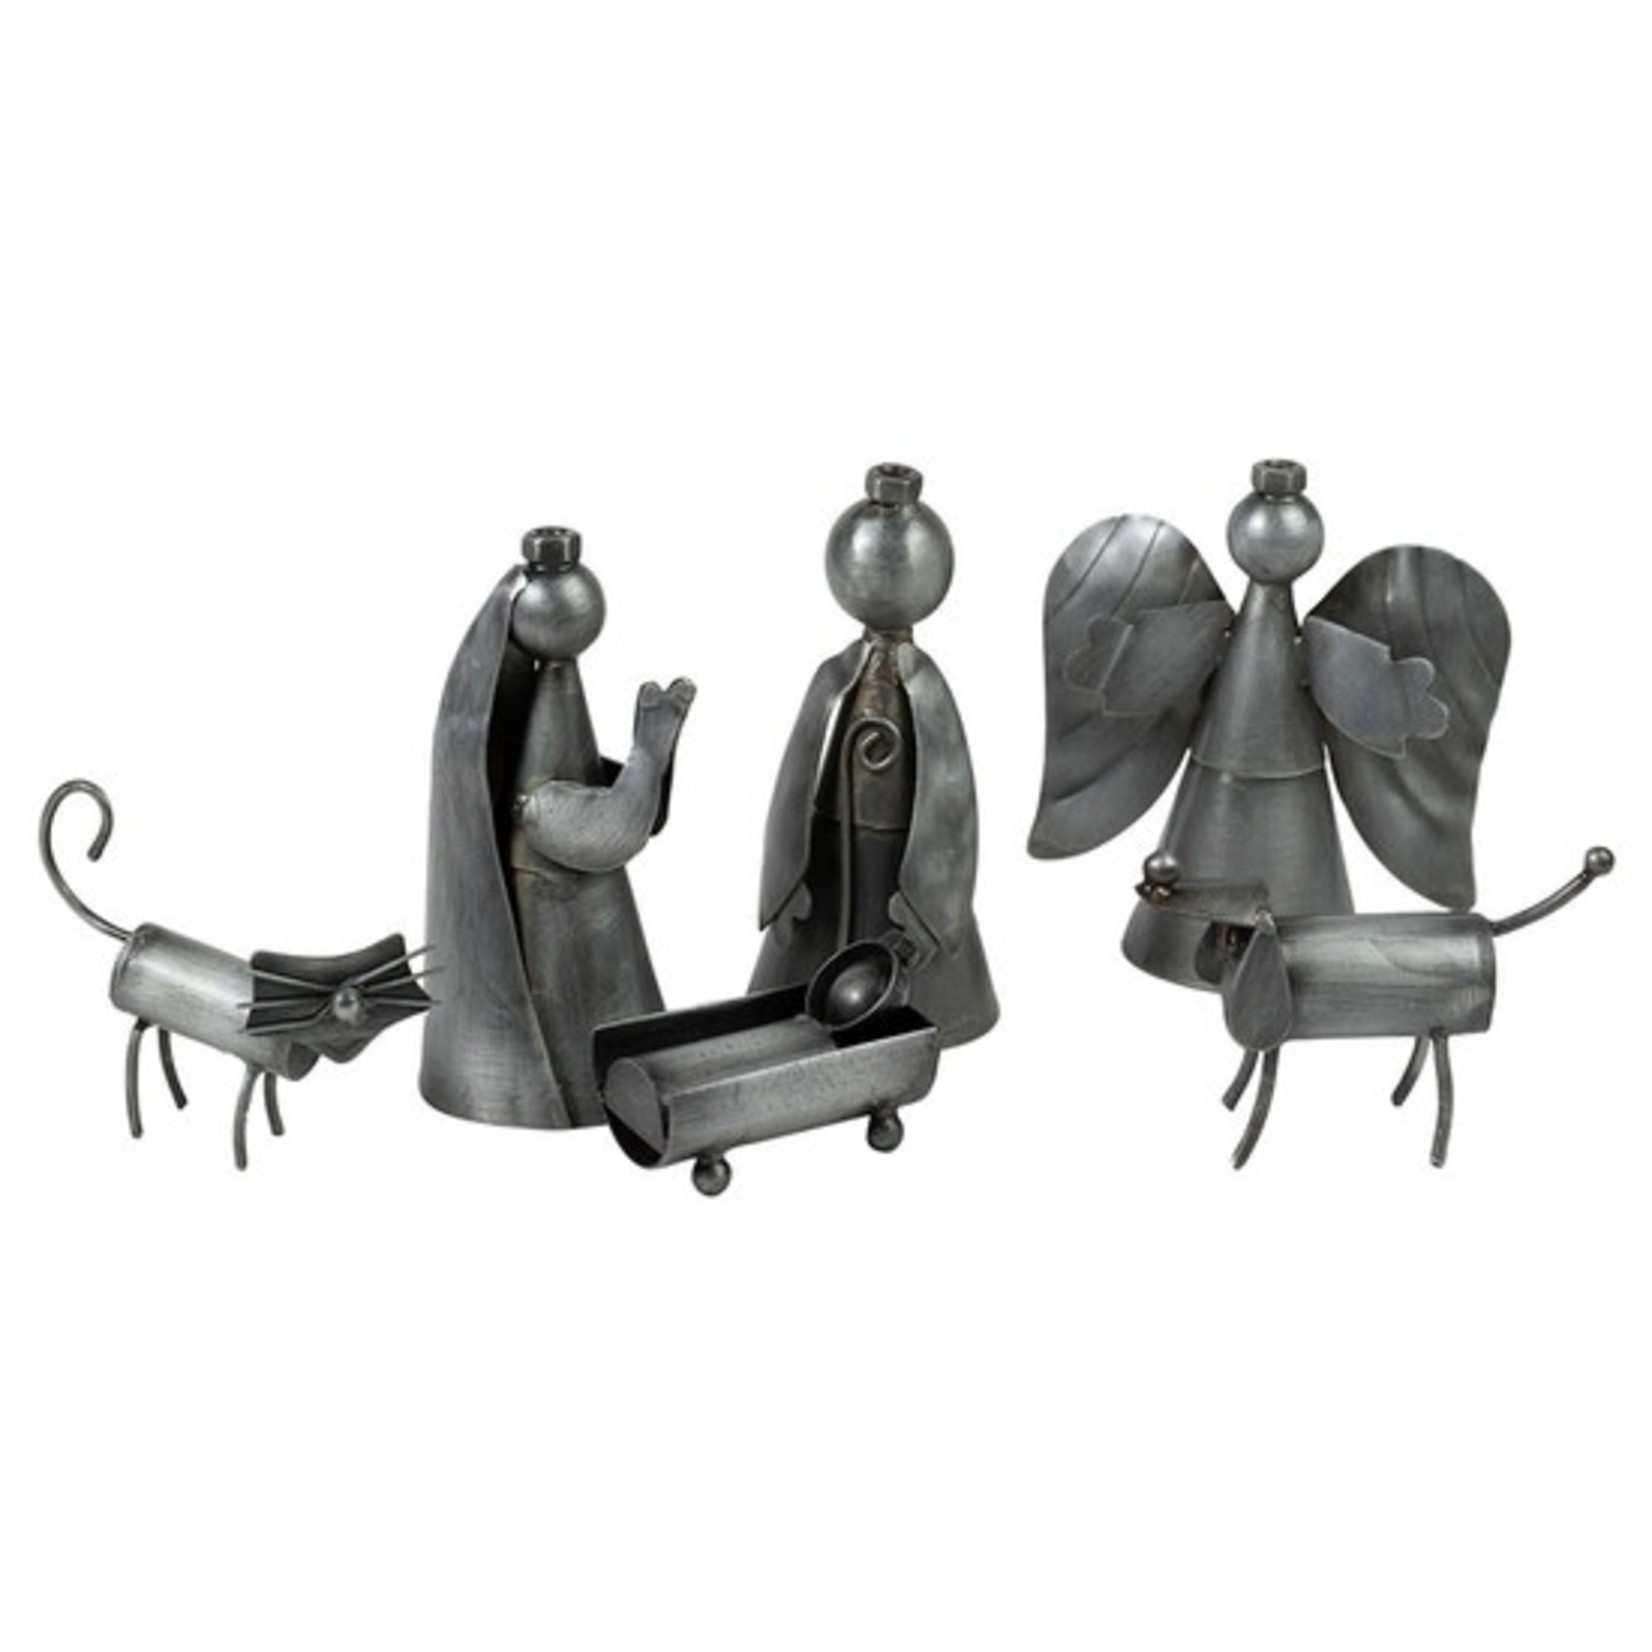 Ten Thousand Villages USA Funky Cat And Dog Nativity Set, India